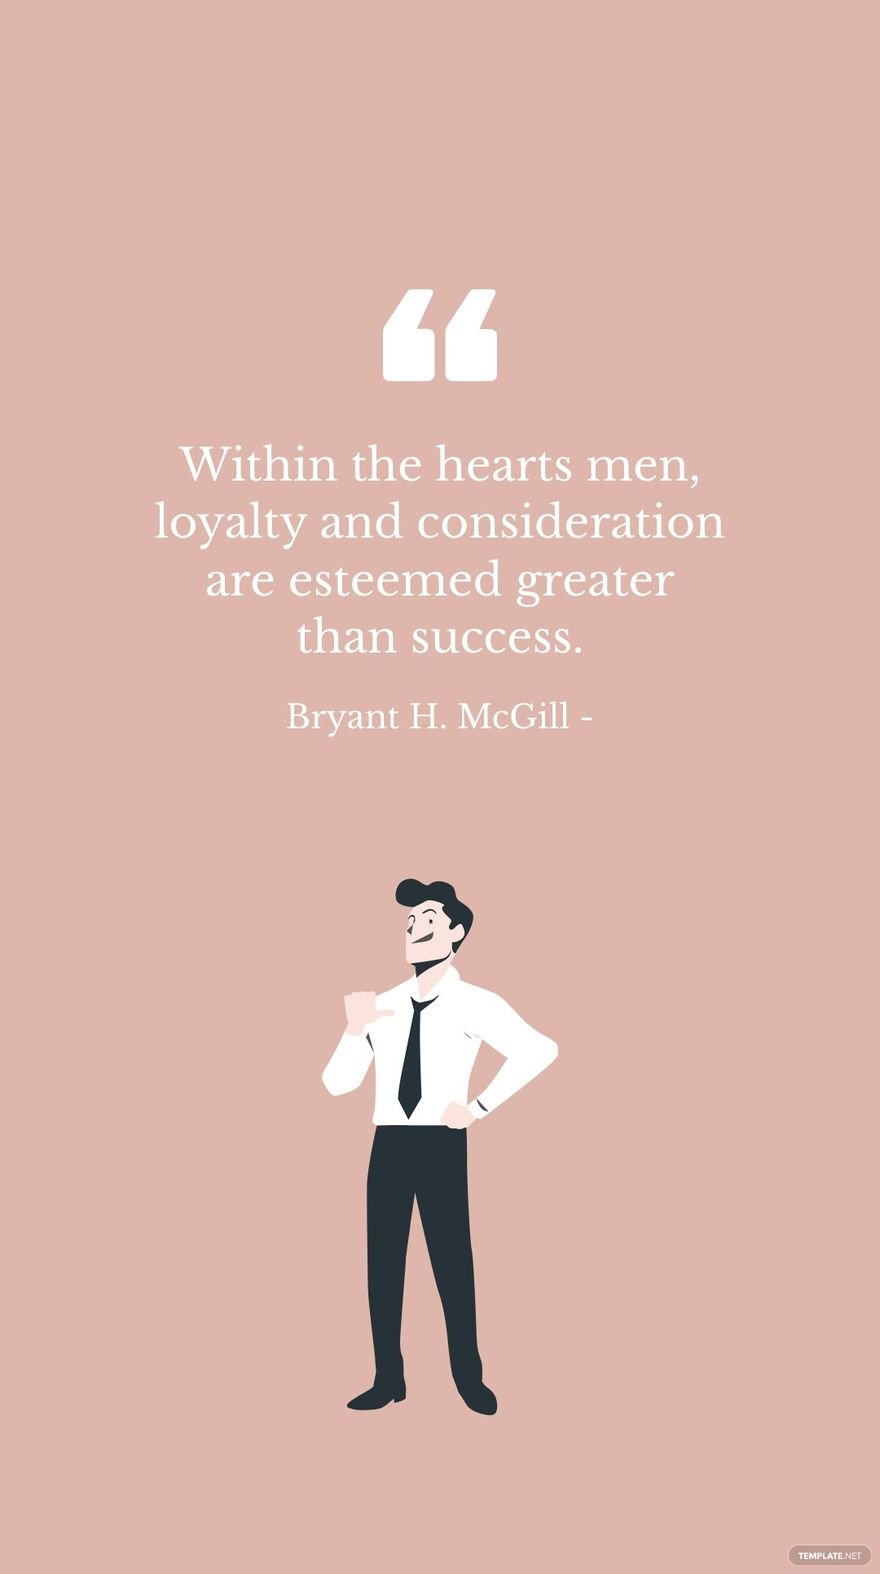 Free Bryant H. McGill - Within the hearts men, loyalty and consideration are esteemed greater than success. in JPG